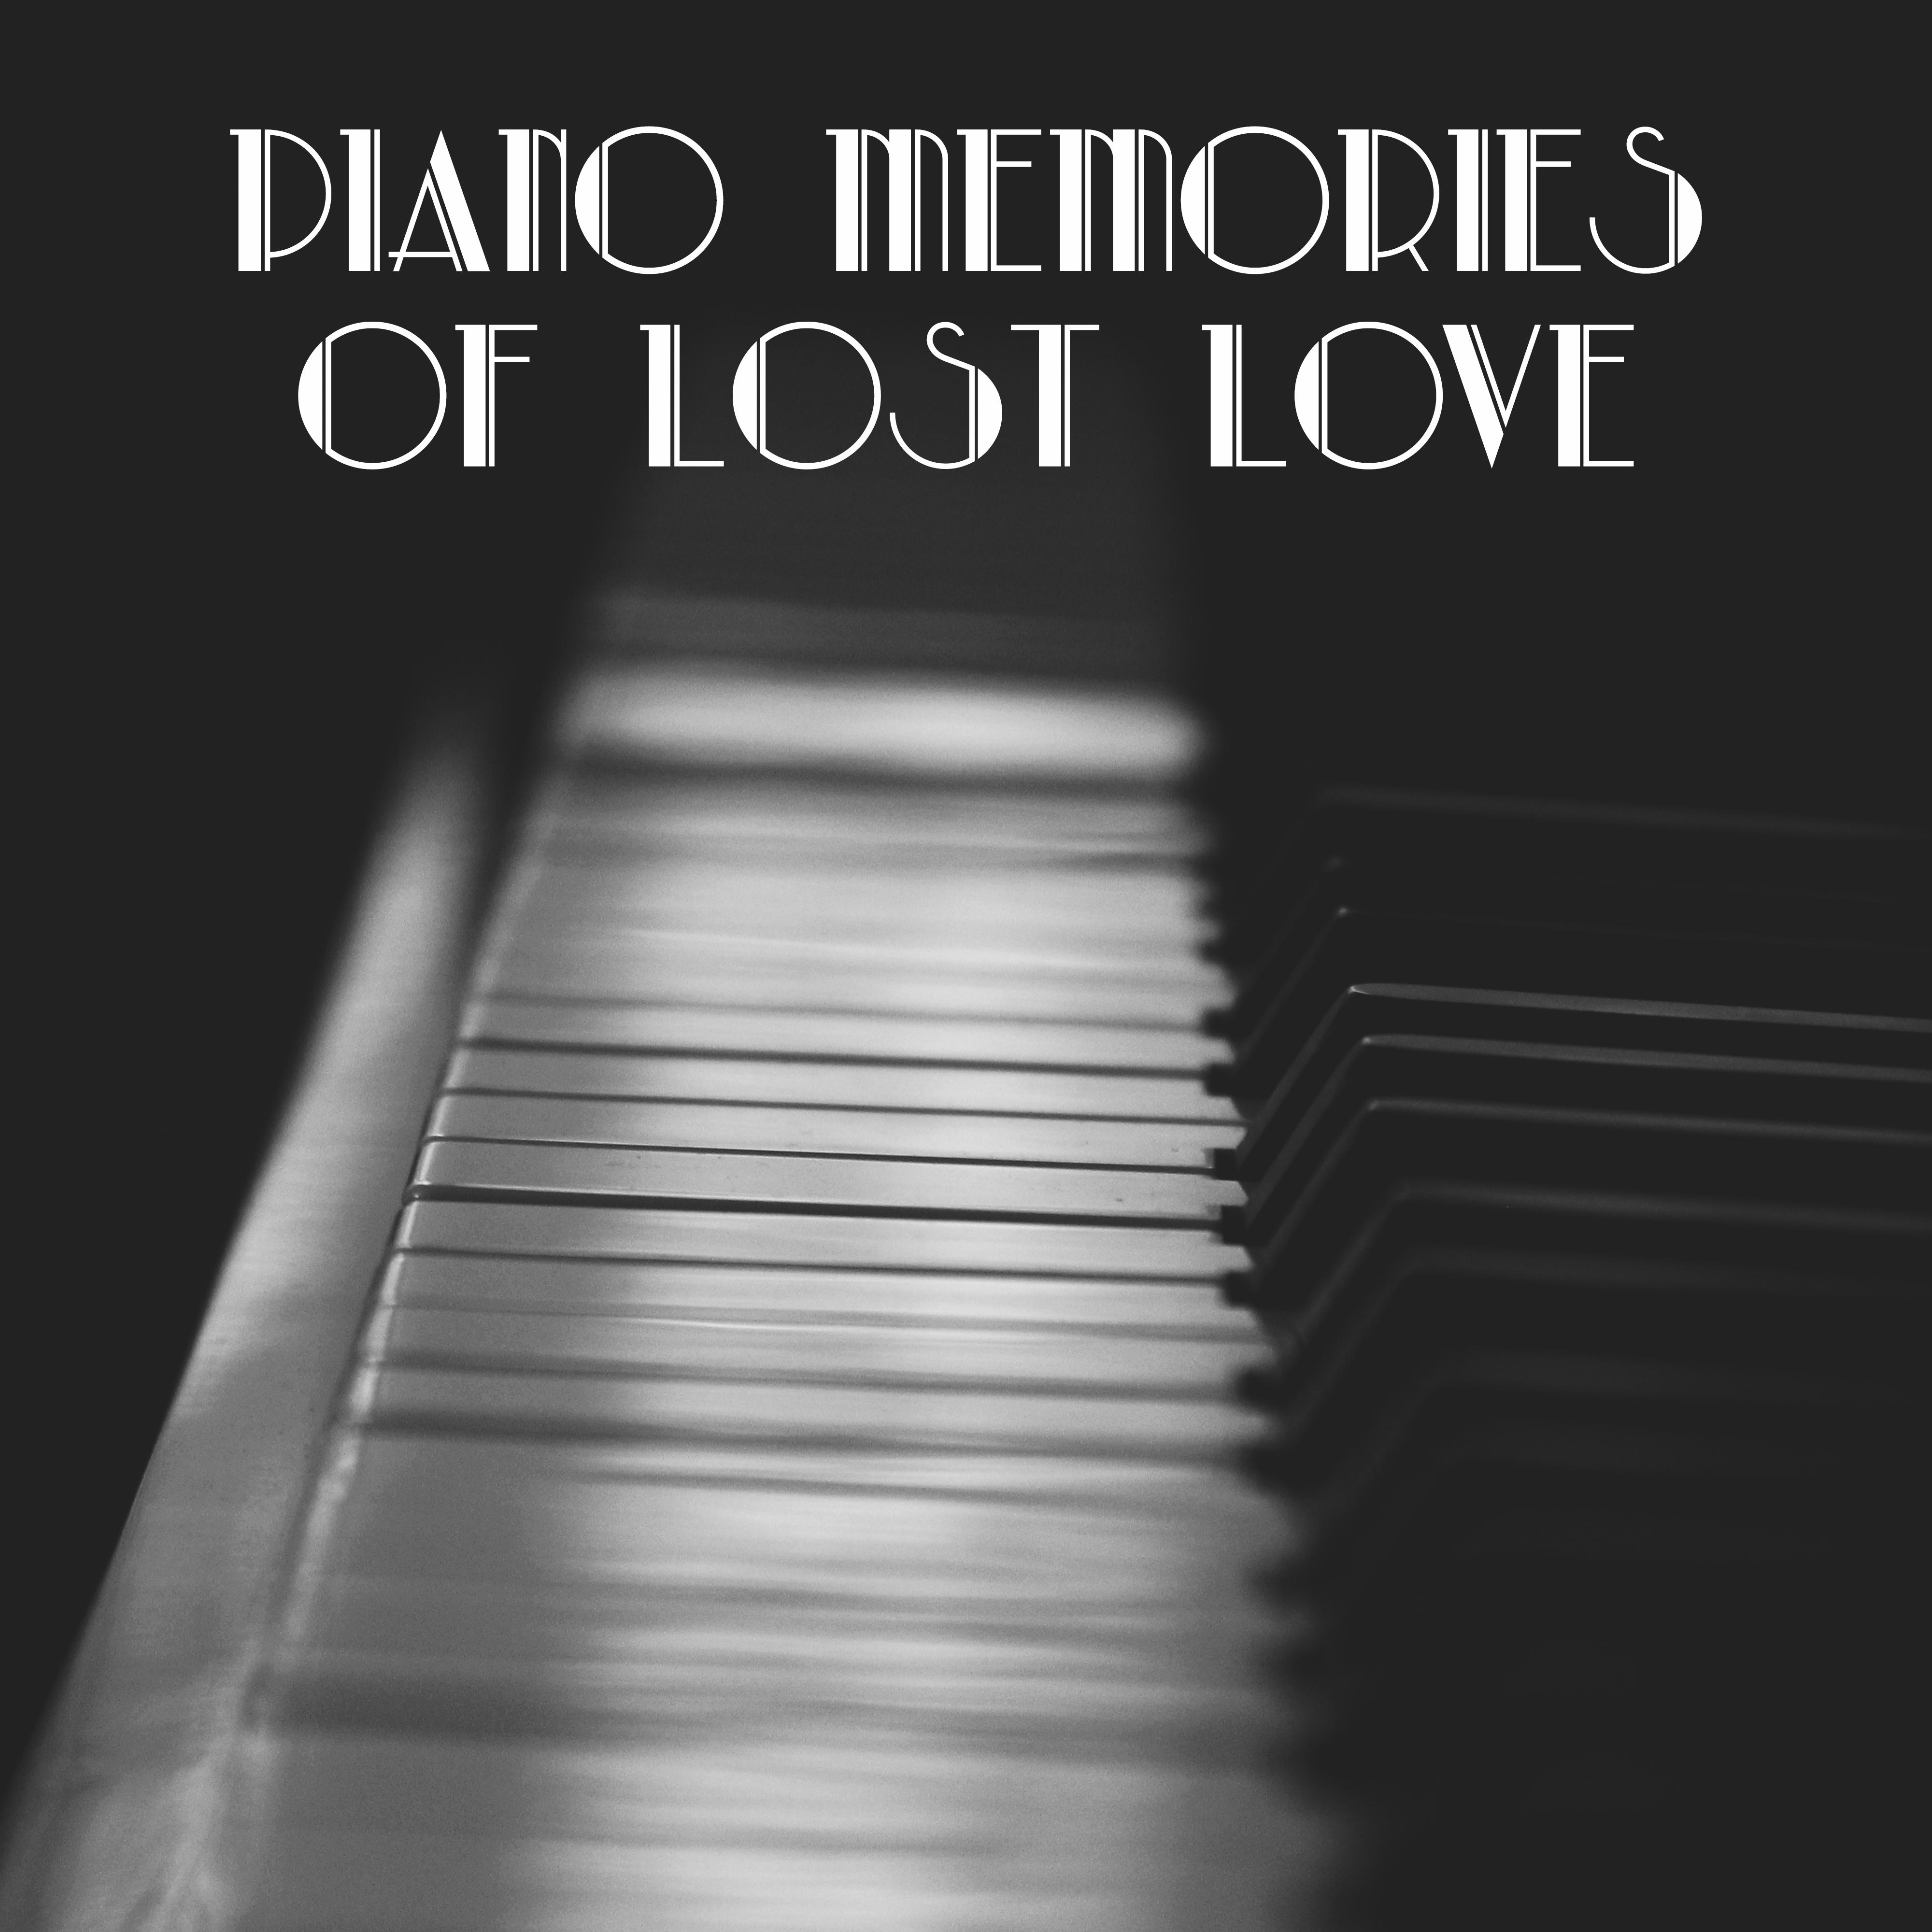 Piano Memories of Lost Love: 15 Sentimental & Sad Piano Jazz 2019 Tracks for Lonely Days & Bad Memories